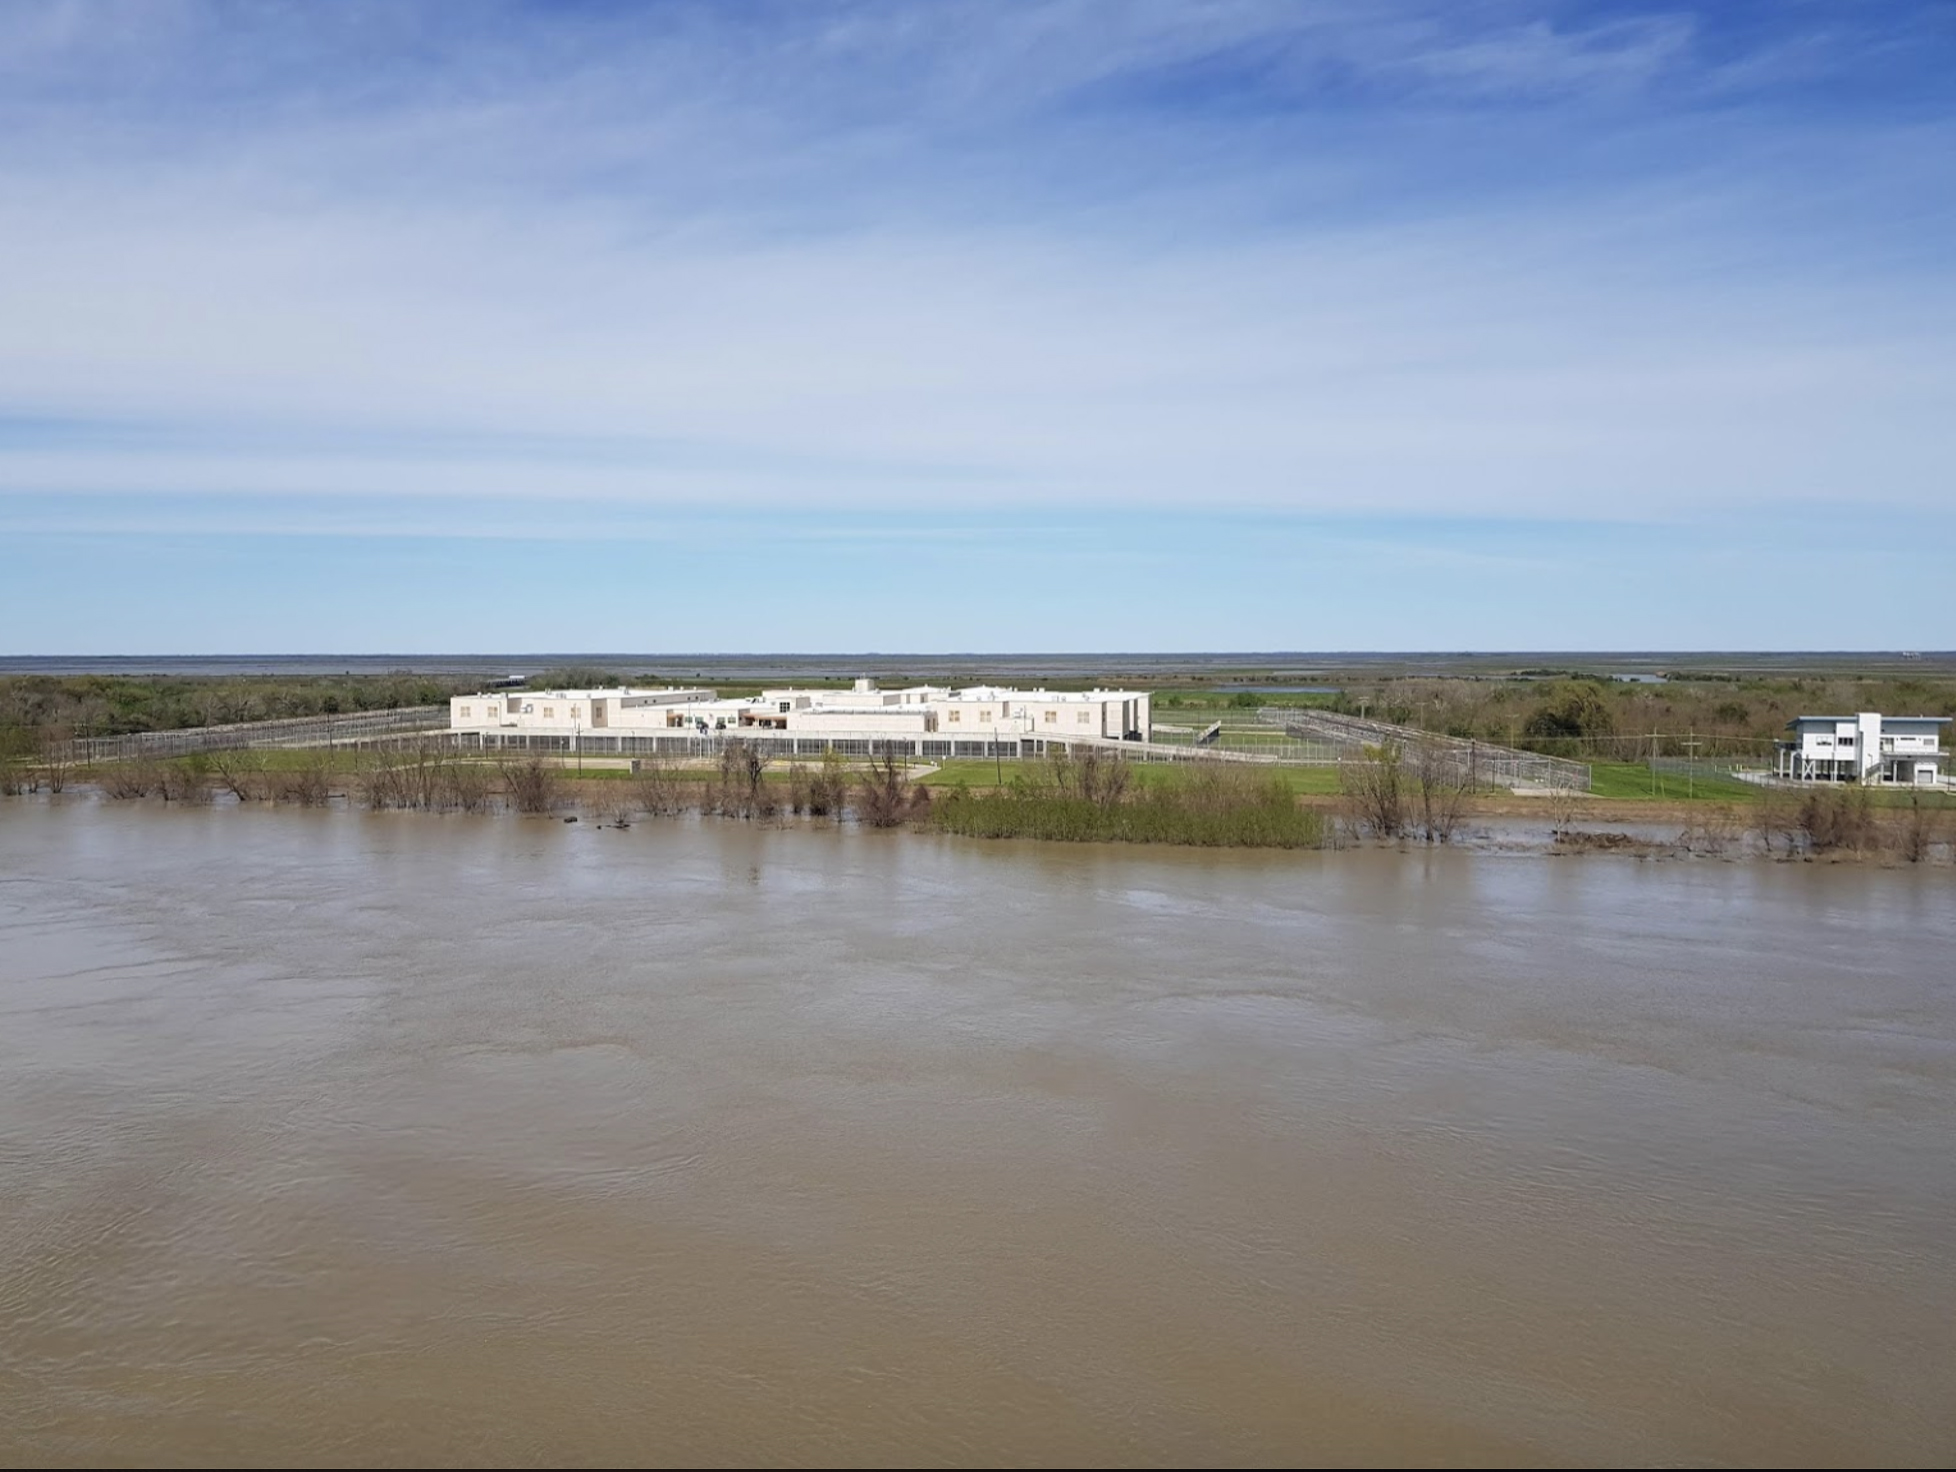 The Plaquemines Parish Detention Center was rebuilt on the same Louisiana marsh for $105 million after Hurricane Katrina destroyed the original building. (Map data © March 2019 Google, Image uploaded by nomad)